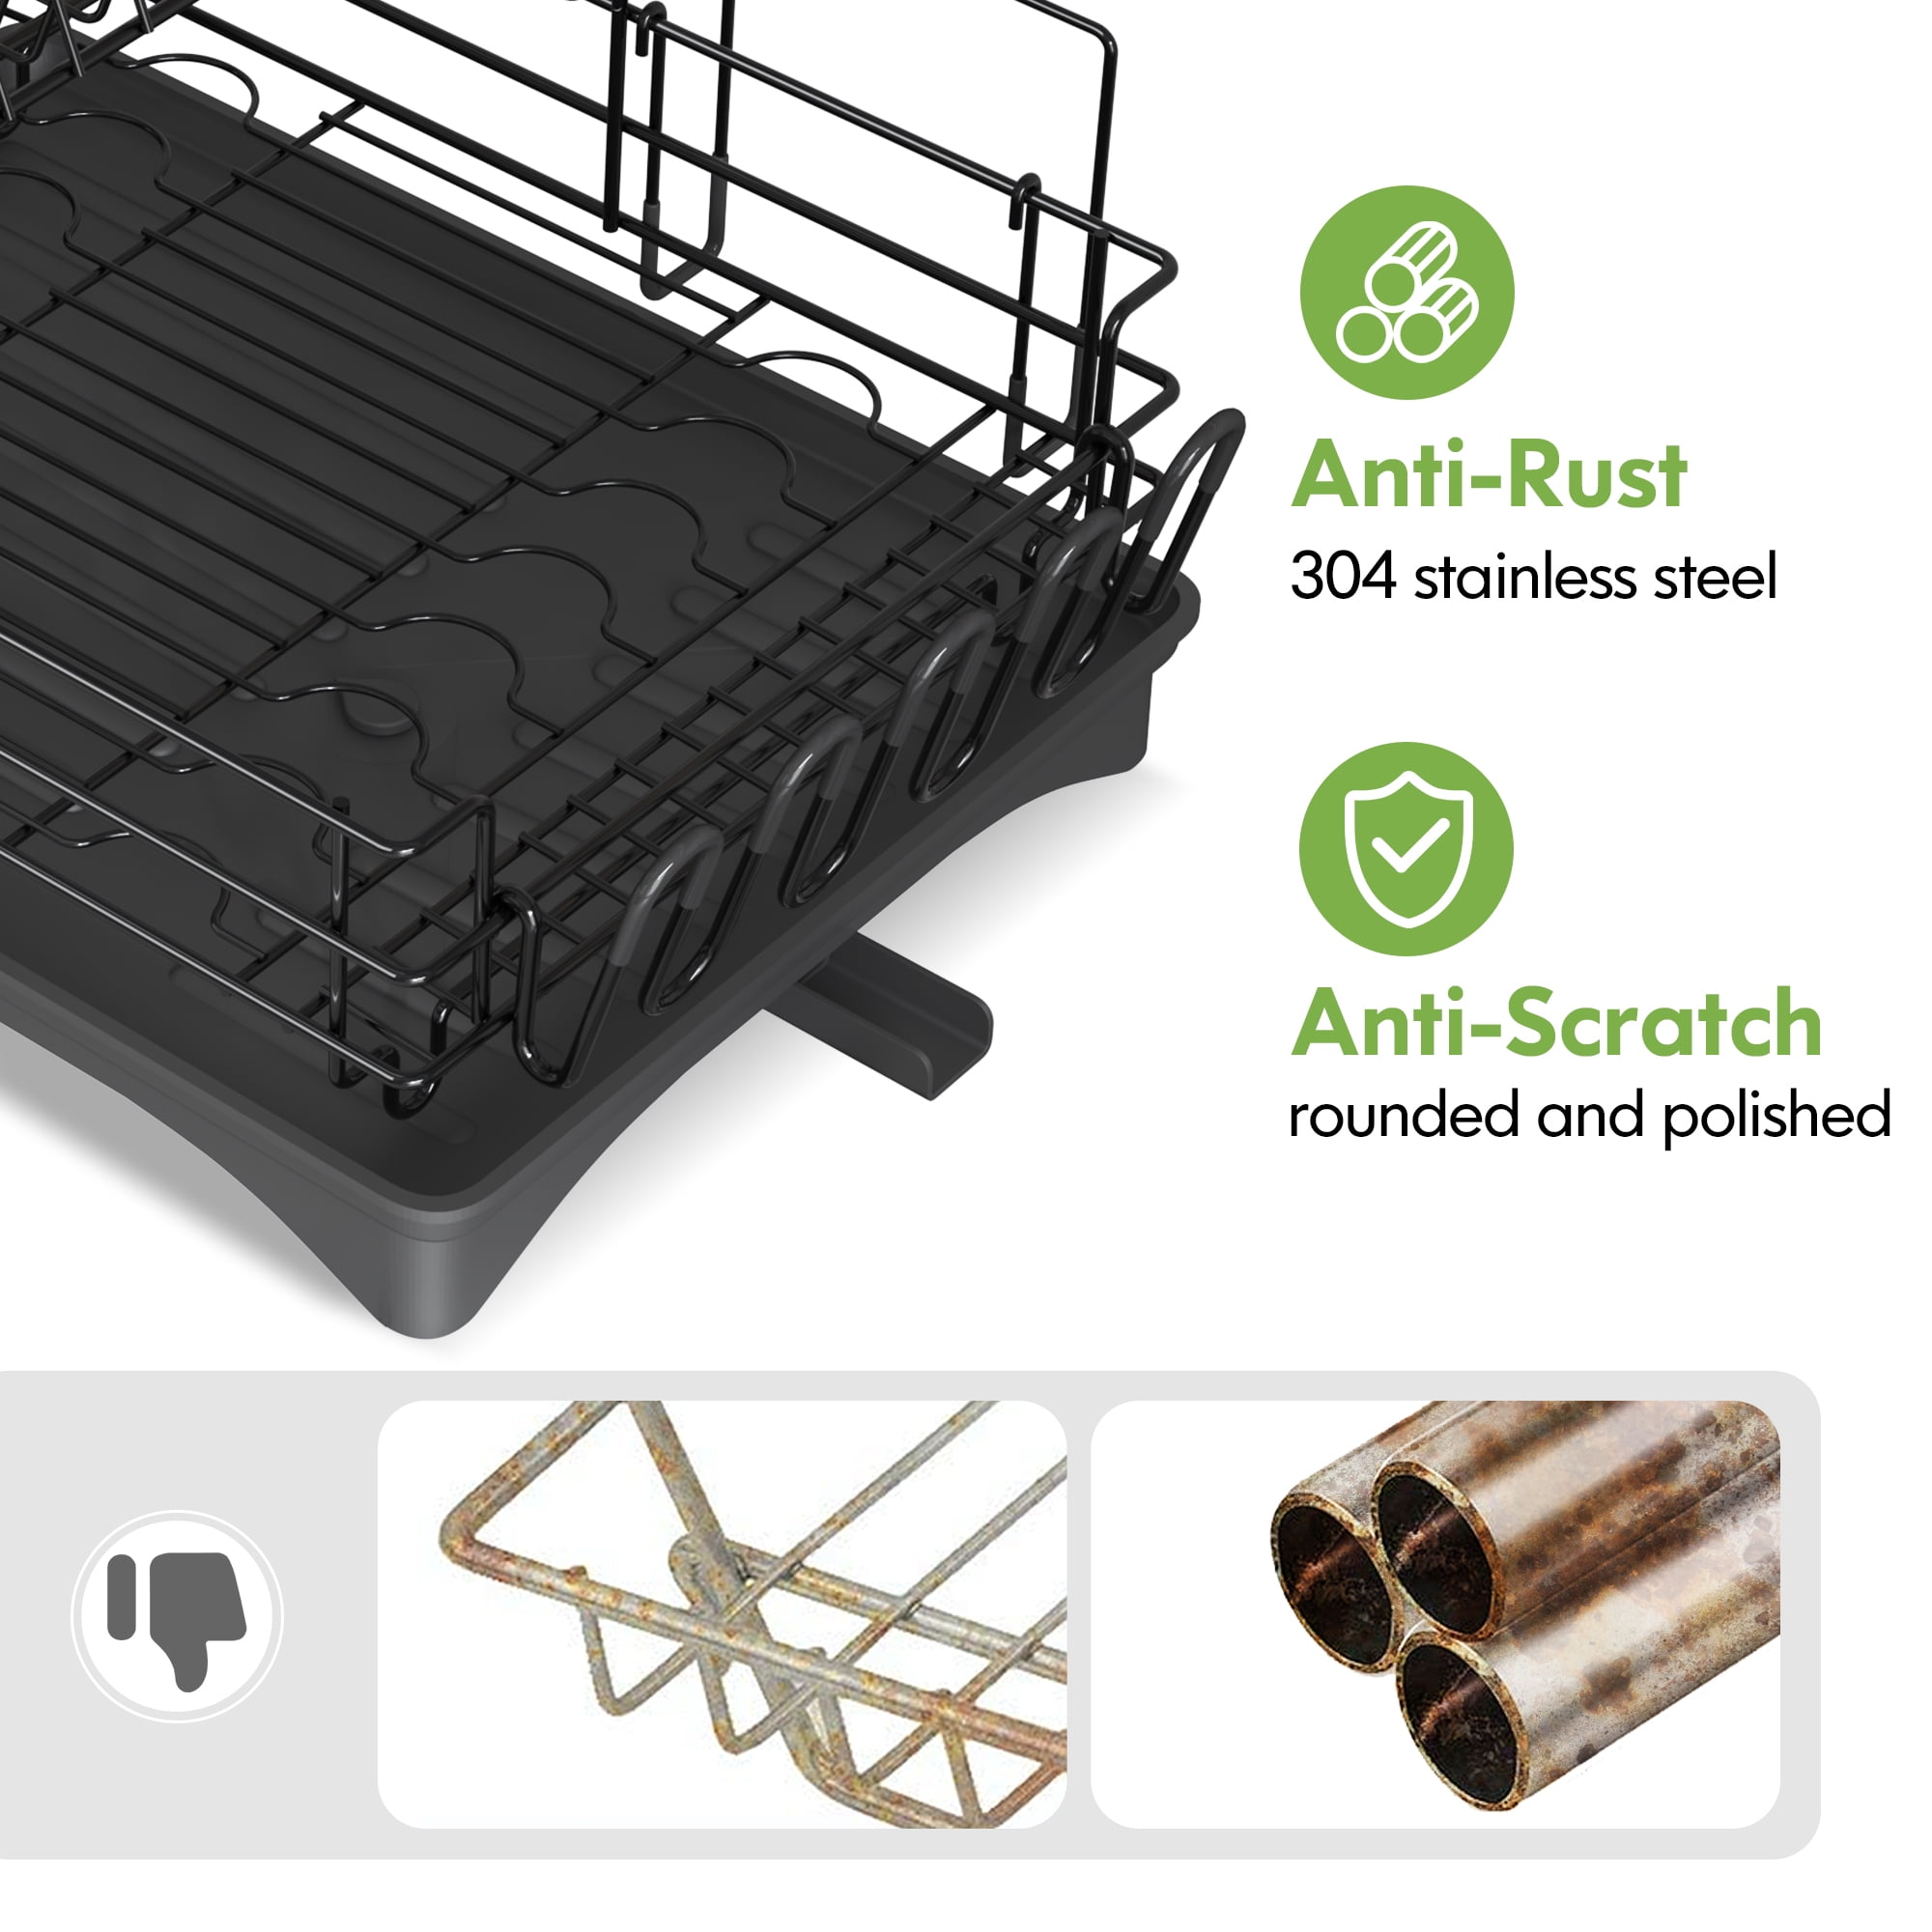 MAJALiS Dish Drying Rack and Drainboard Set, 2 Tier Large Dish Rack with  Swivel Spout, Stainless Steel Dish Drainer for Kitchen Counter with Wine  Glass Holder a…